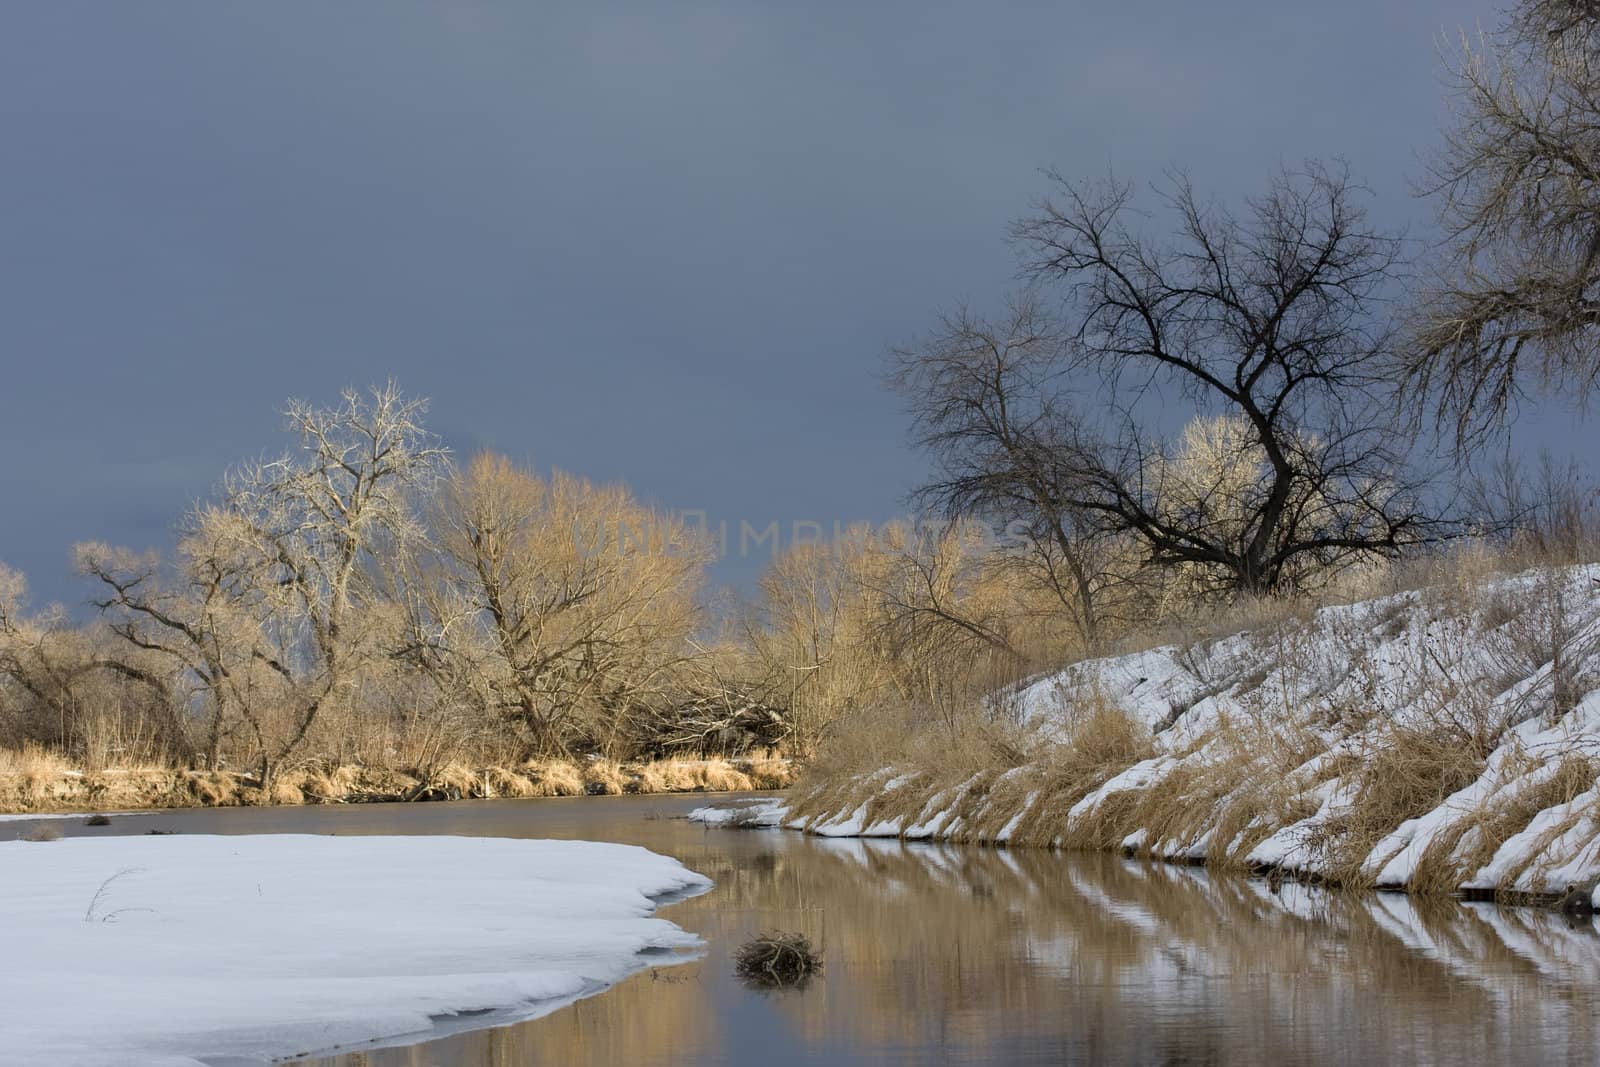 Riparian forest along a river in Colorado prairies by PixelsAway